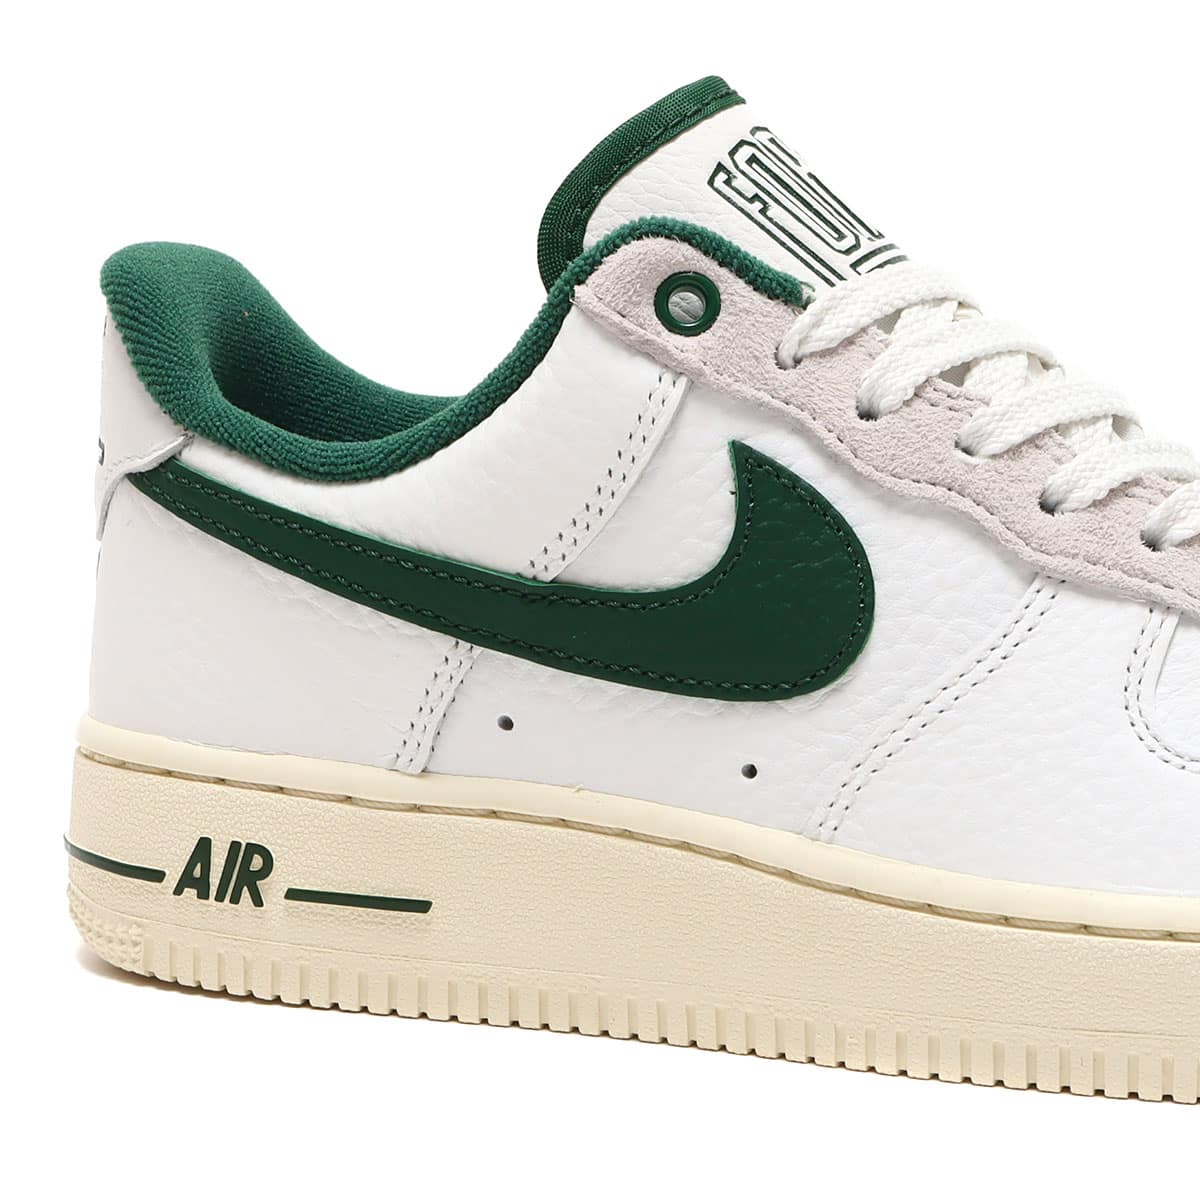 Nike WMNS Air Force 1 Low Command Force Summit White/Gorge Green